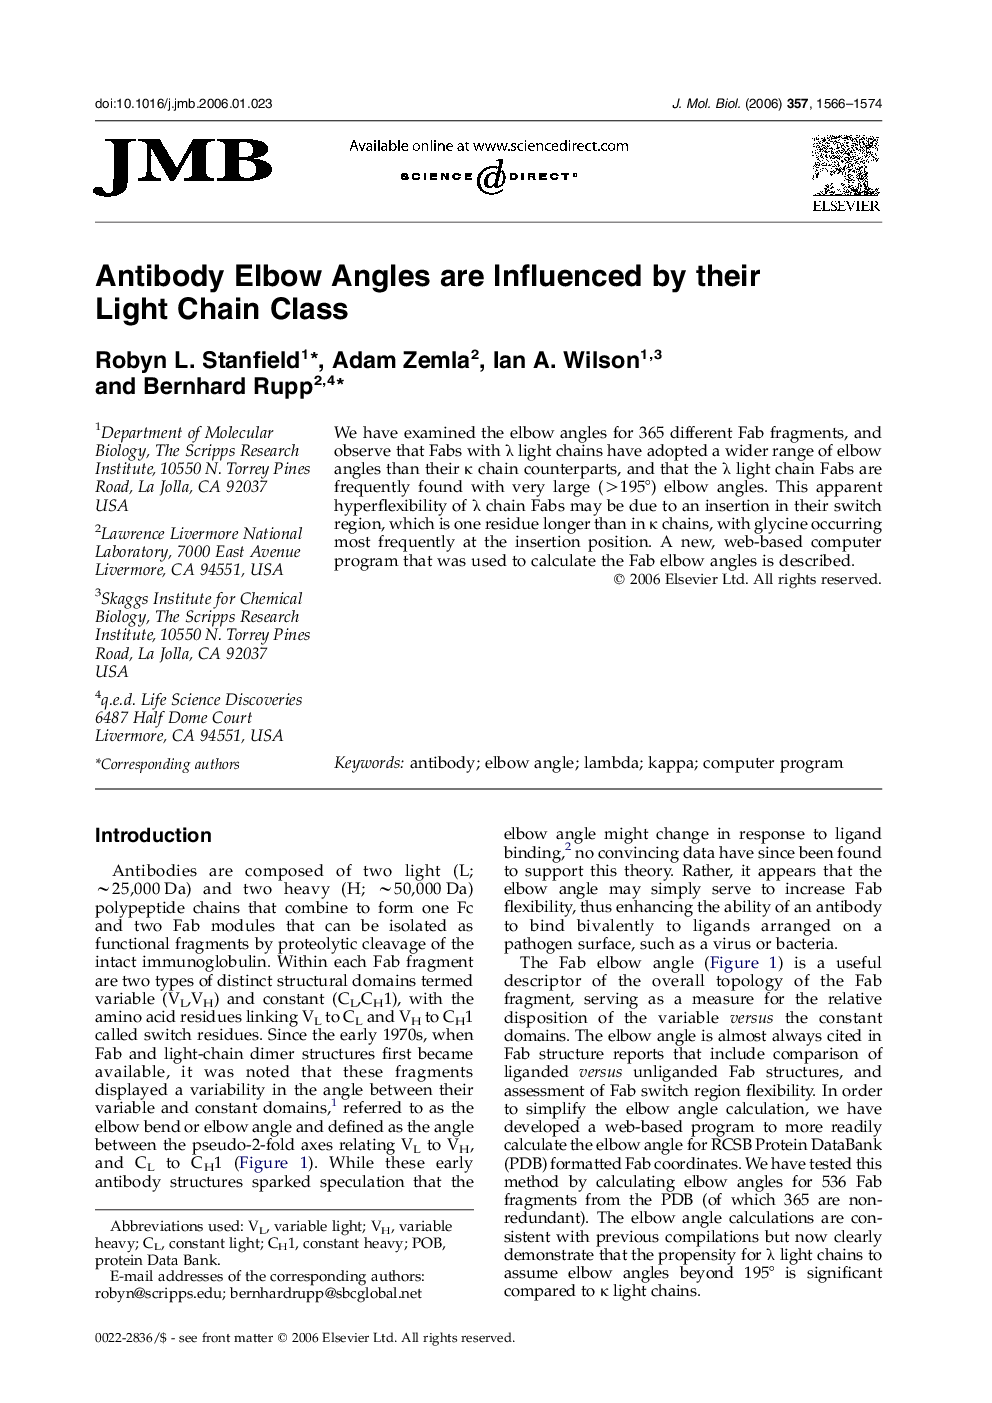 Antibody Elbow Angles are Influenced by their Light Chain Class